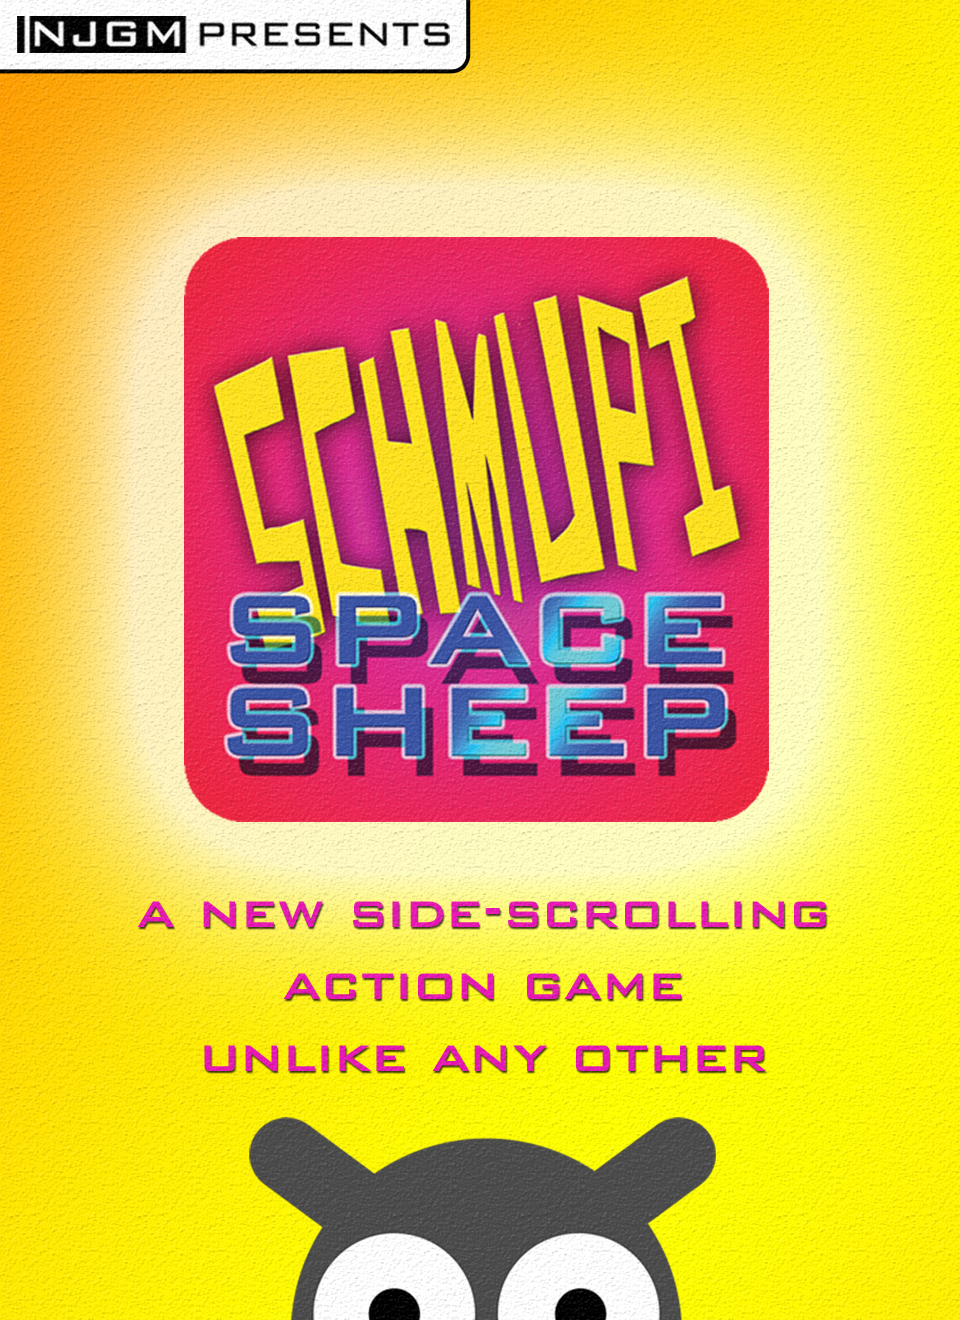 Space Sheep Games